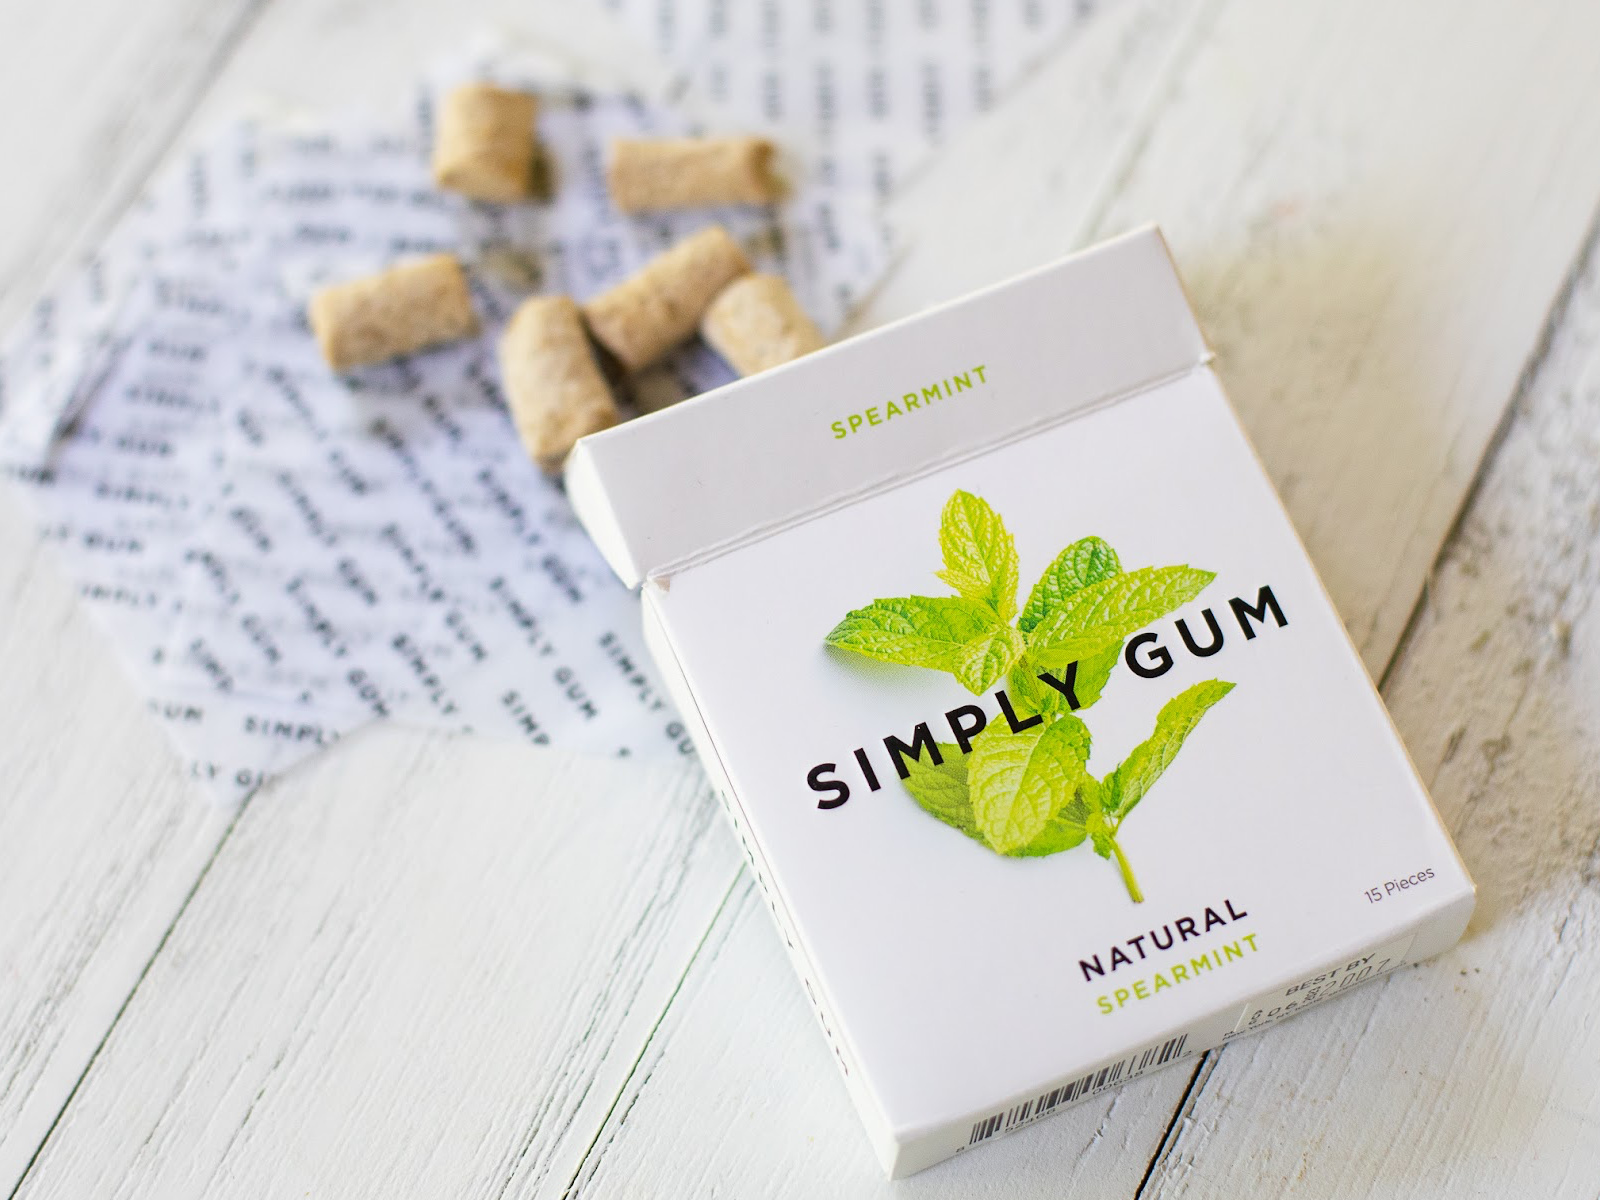 Get A Pack Of Simply Gum For Just 50¢ At Publix